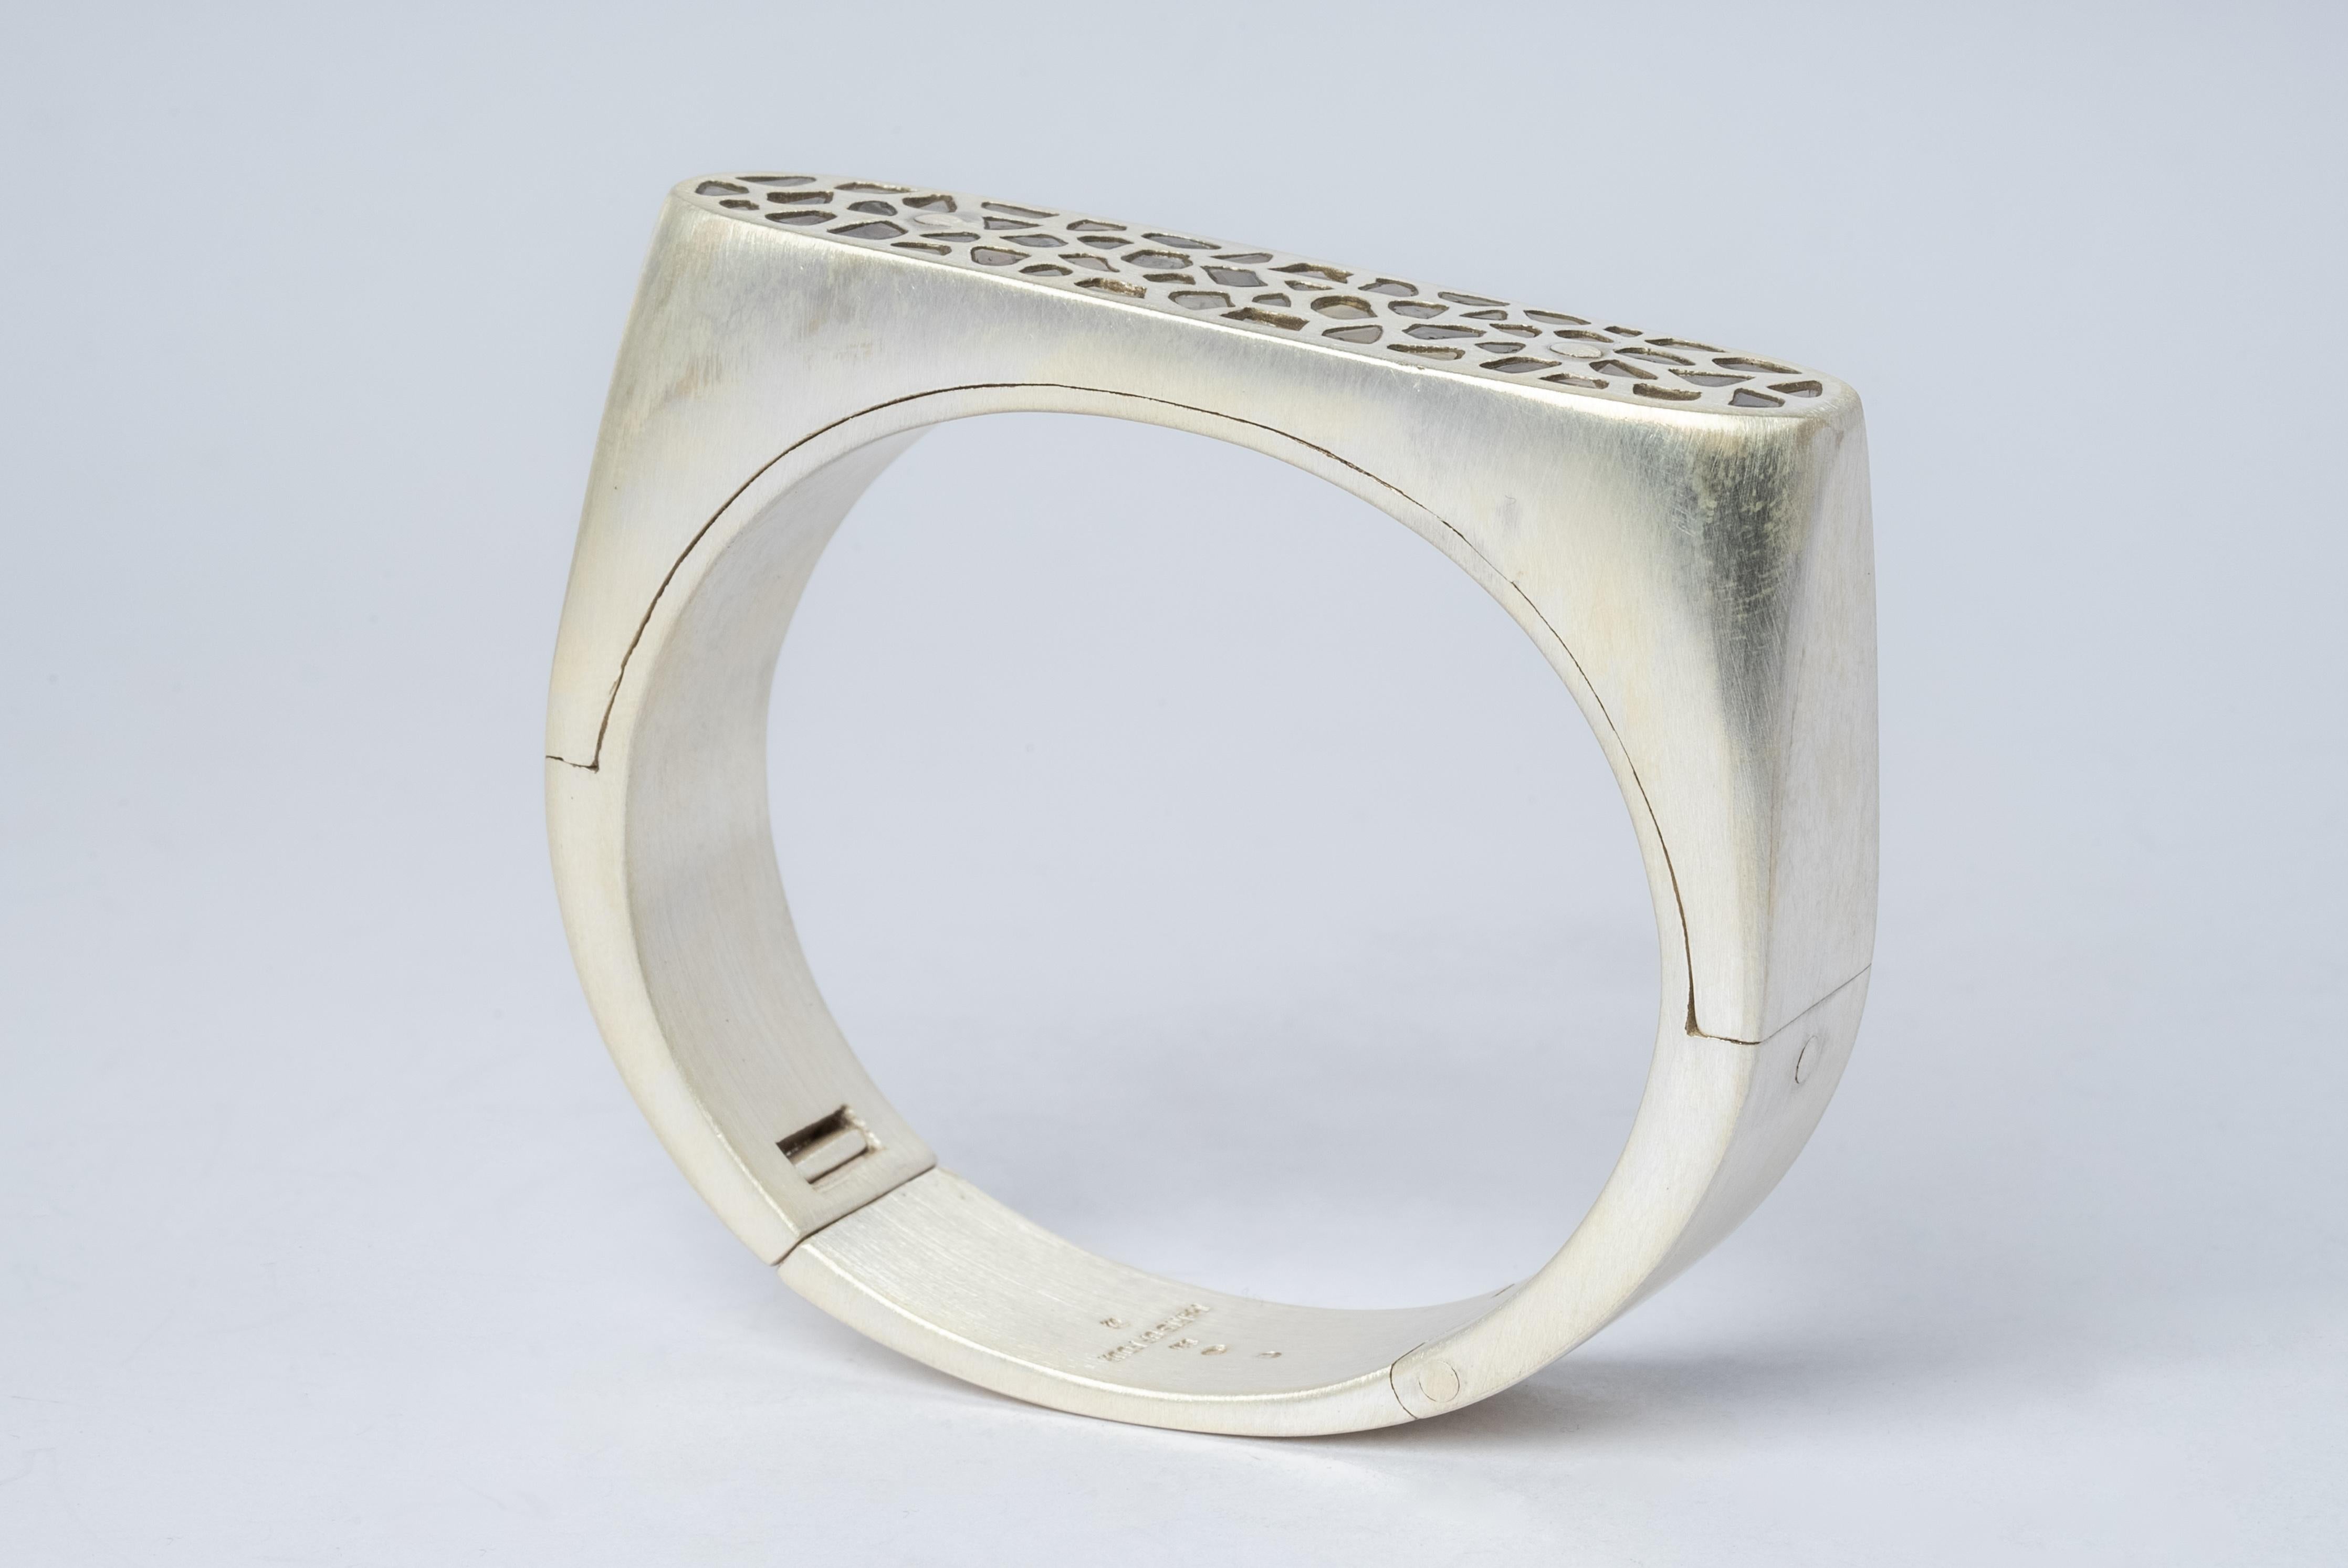 Bracelet in sterling silver and slabs of rough diamond set in mega pave setting. These slabs are removed from a larger chunk of diamond. This item is made with a naturally occurring element and will vary from the photograph you see. Each piece is